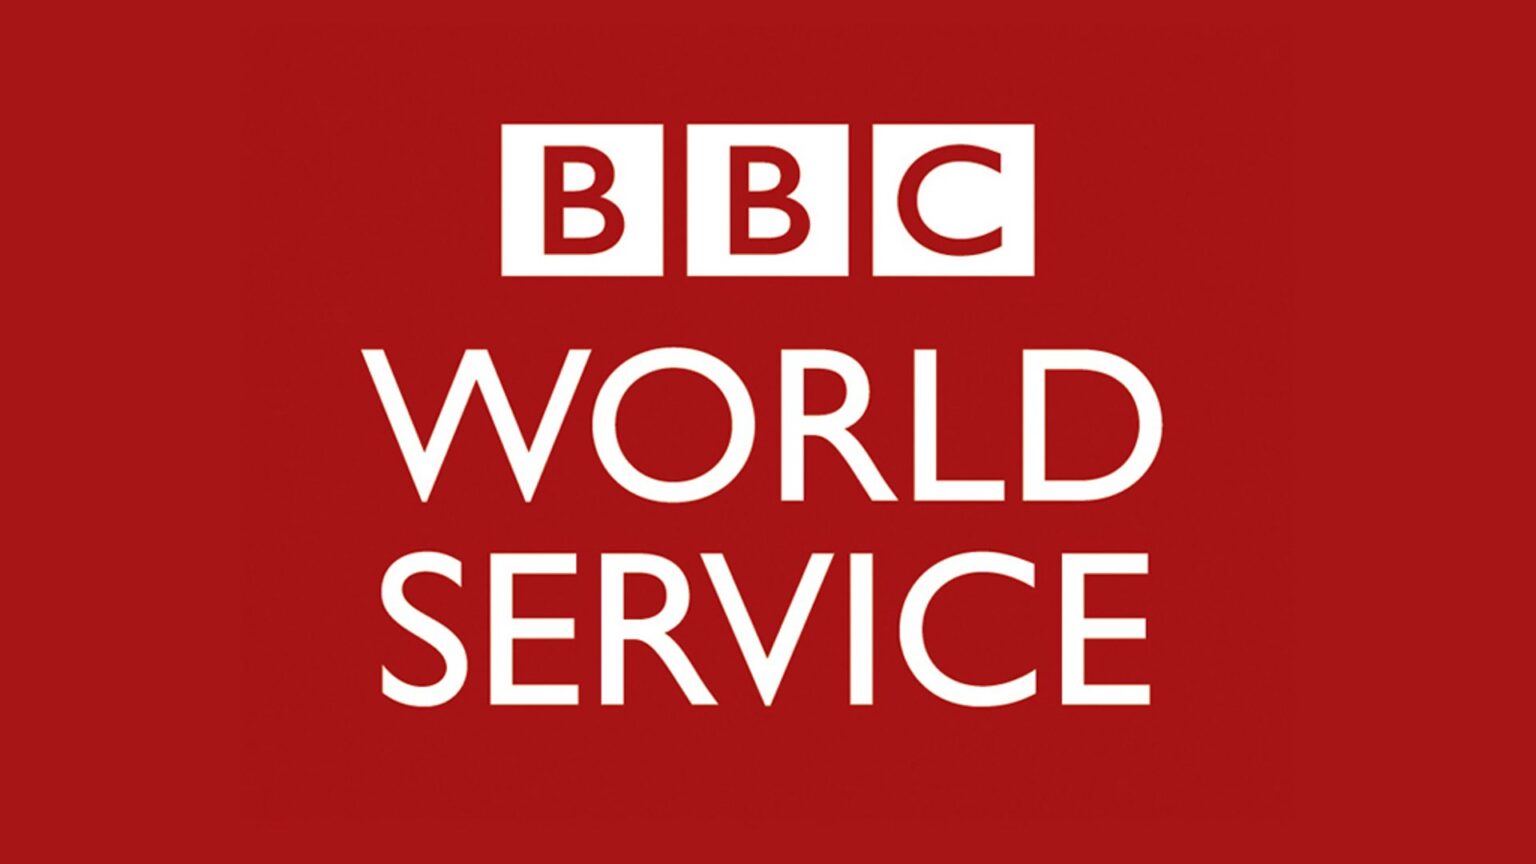 Getting television in the UK is different from the US. What's going to happen with BBC World Service? Here's what we know.